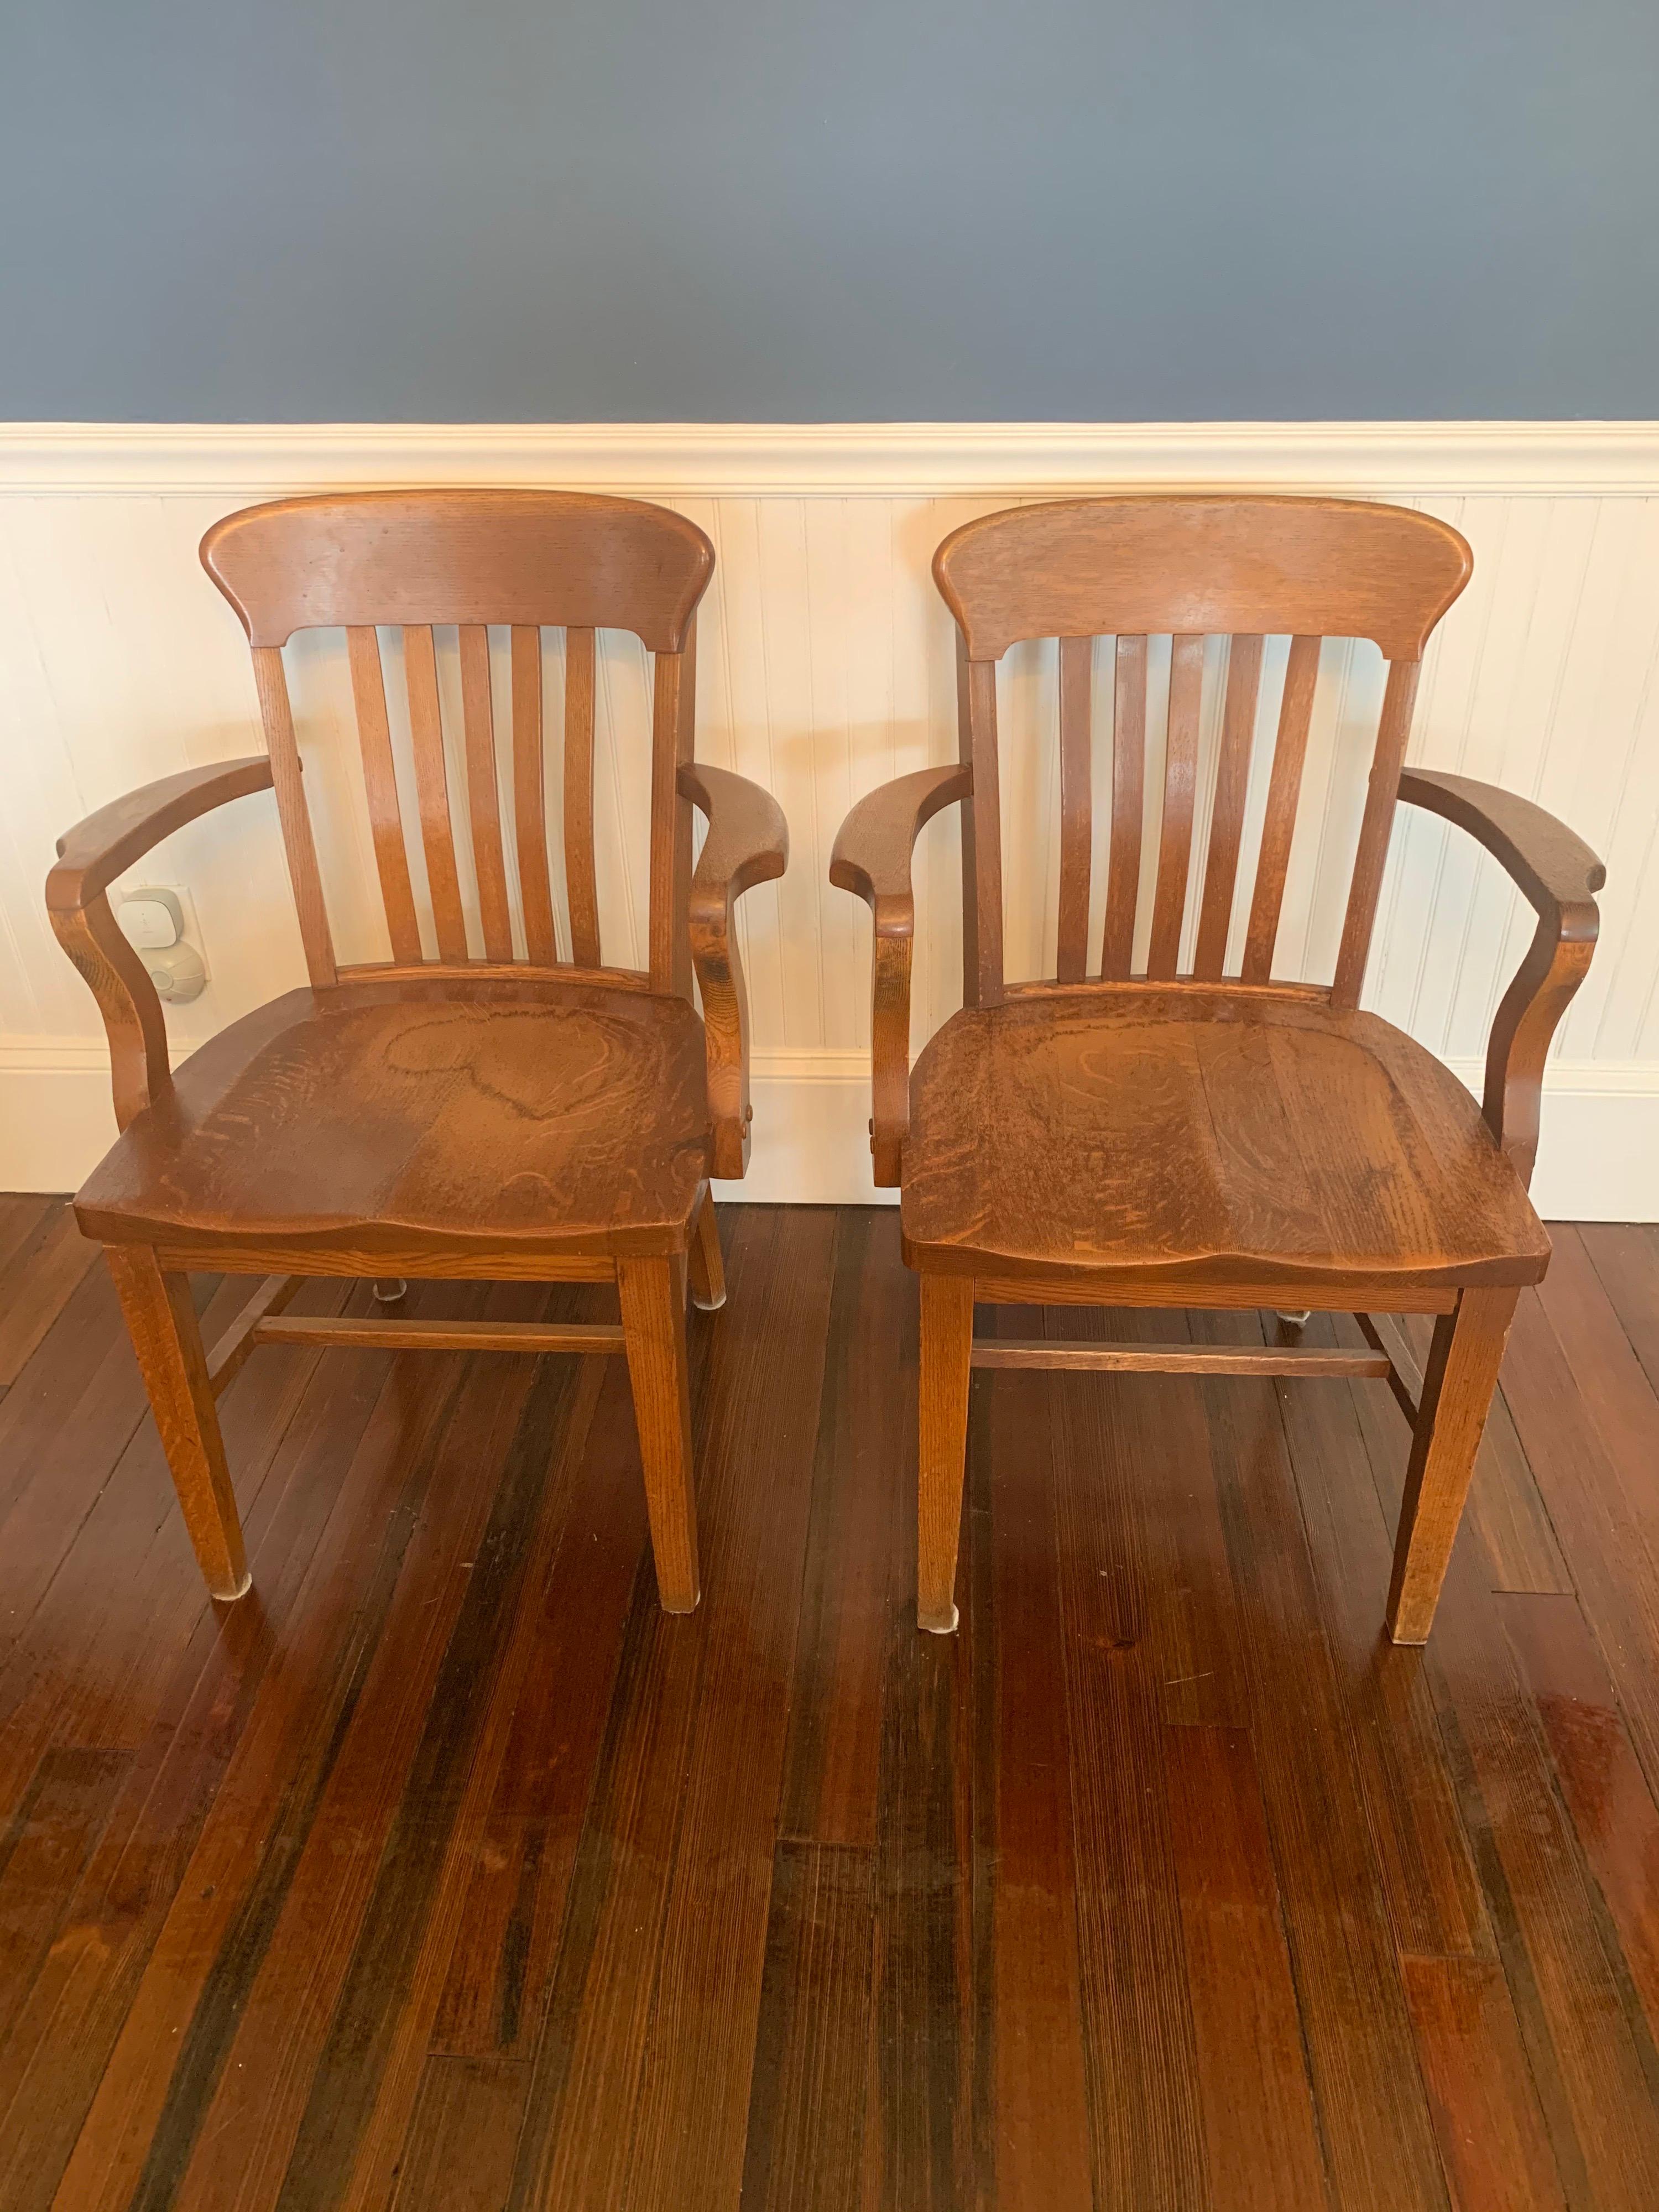 Pair of vintage oak Banker's or Barrister's armchairs.

These armchairs have a bannister styled backings ending in four simple tapered square legs. While the foundation of the chairs are quite standard the arms of the chairs have a beautiful and